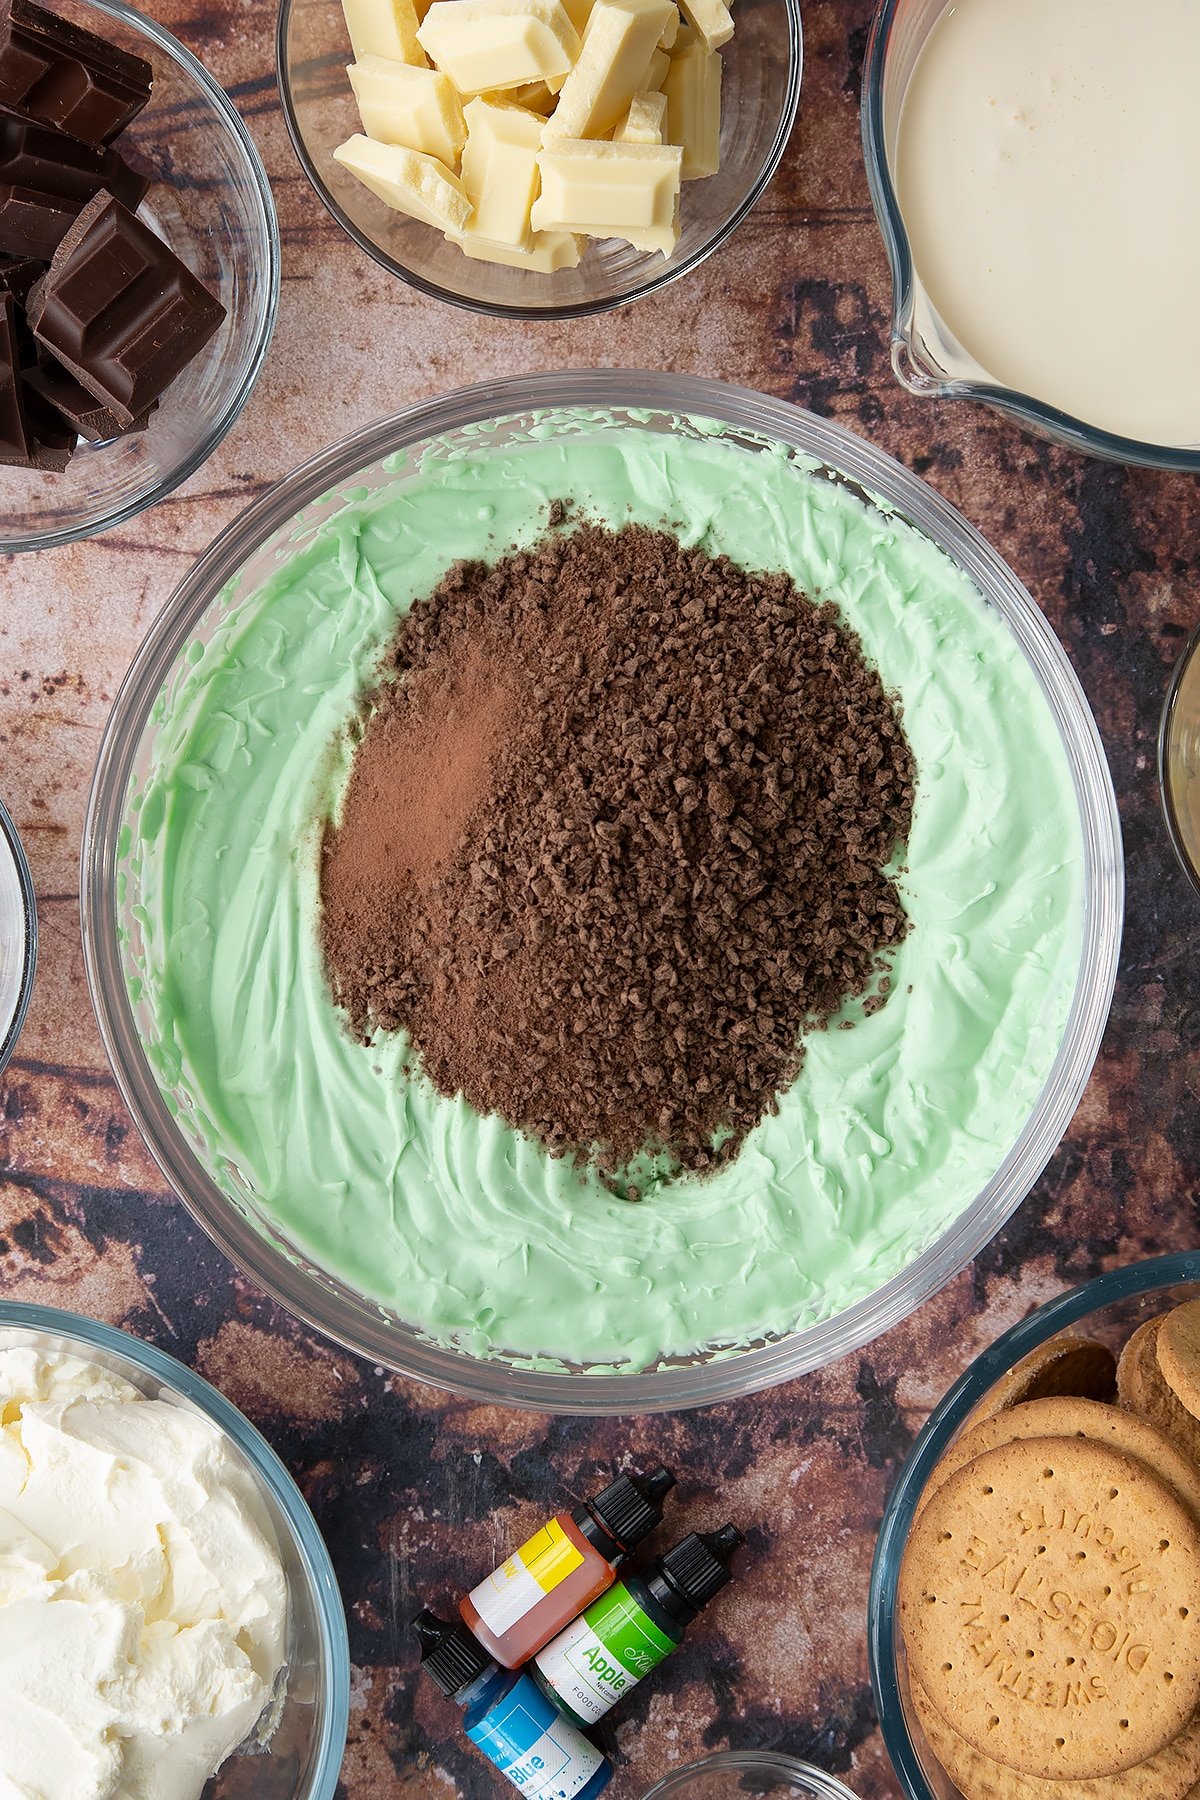 Peppermint green cheesecake filling in a glass bowl with chopped dark chocolate on top. Ingredients to make no bake mint cheesecake surround the bowl.